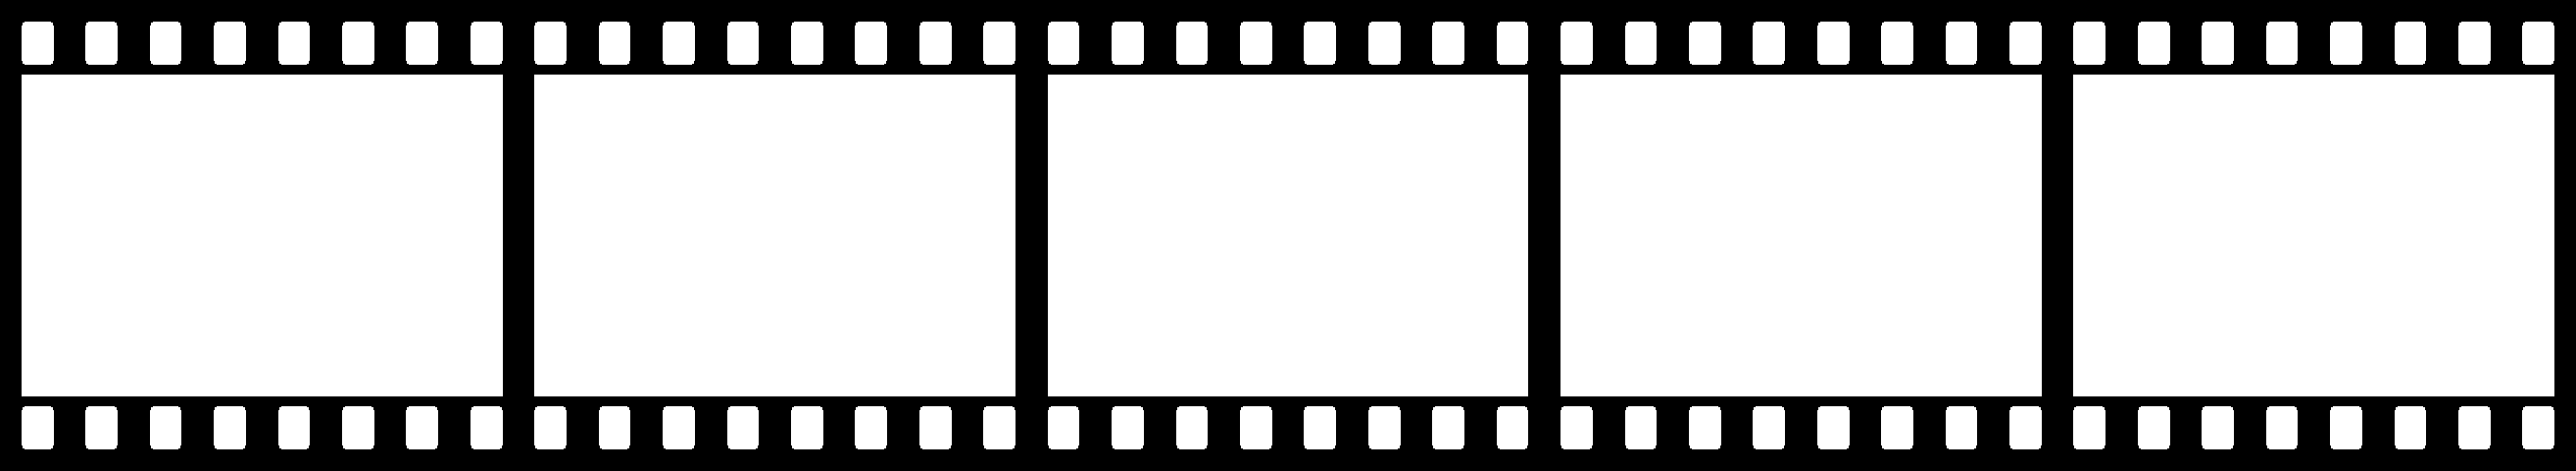 Filmstrip Template Image Search Results